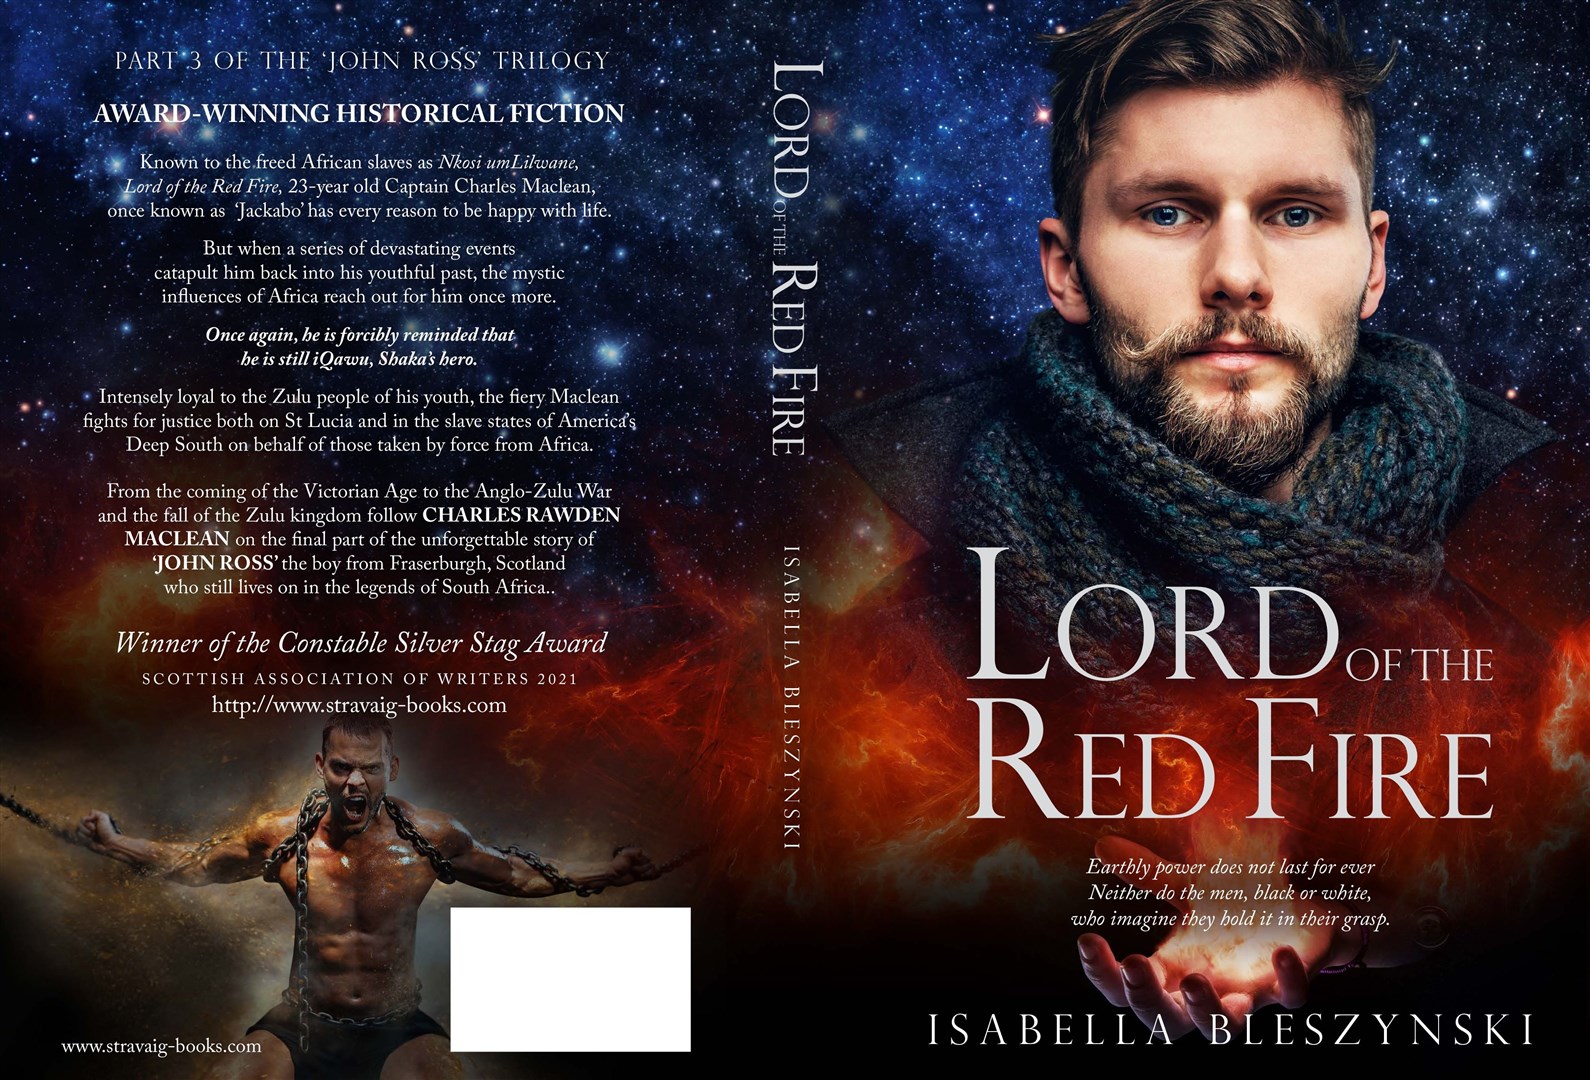 Lord of the Red Fire, which her son Nick will complete and publish in her memory later this year.